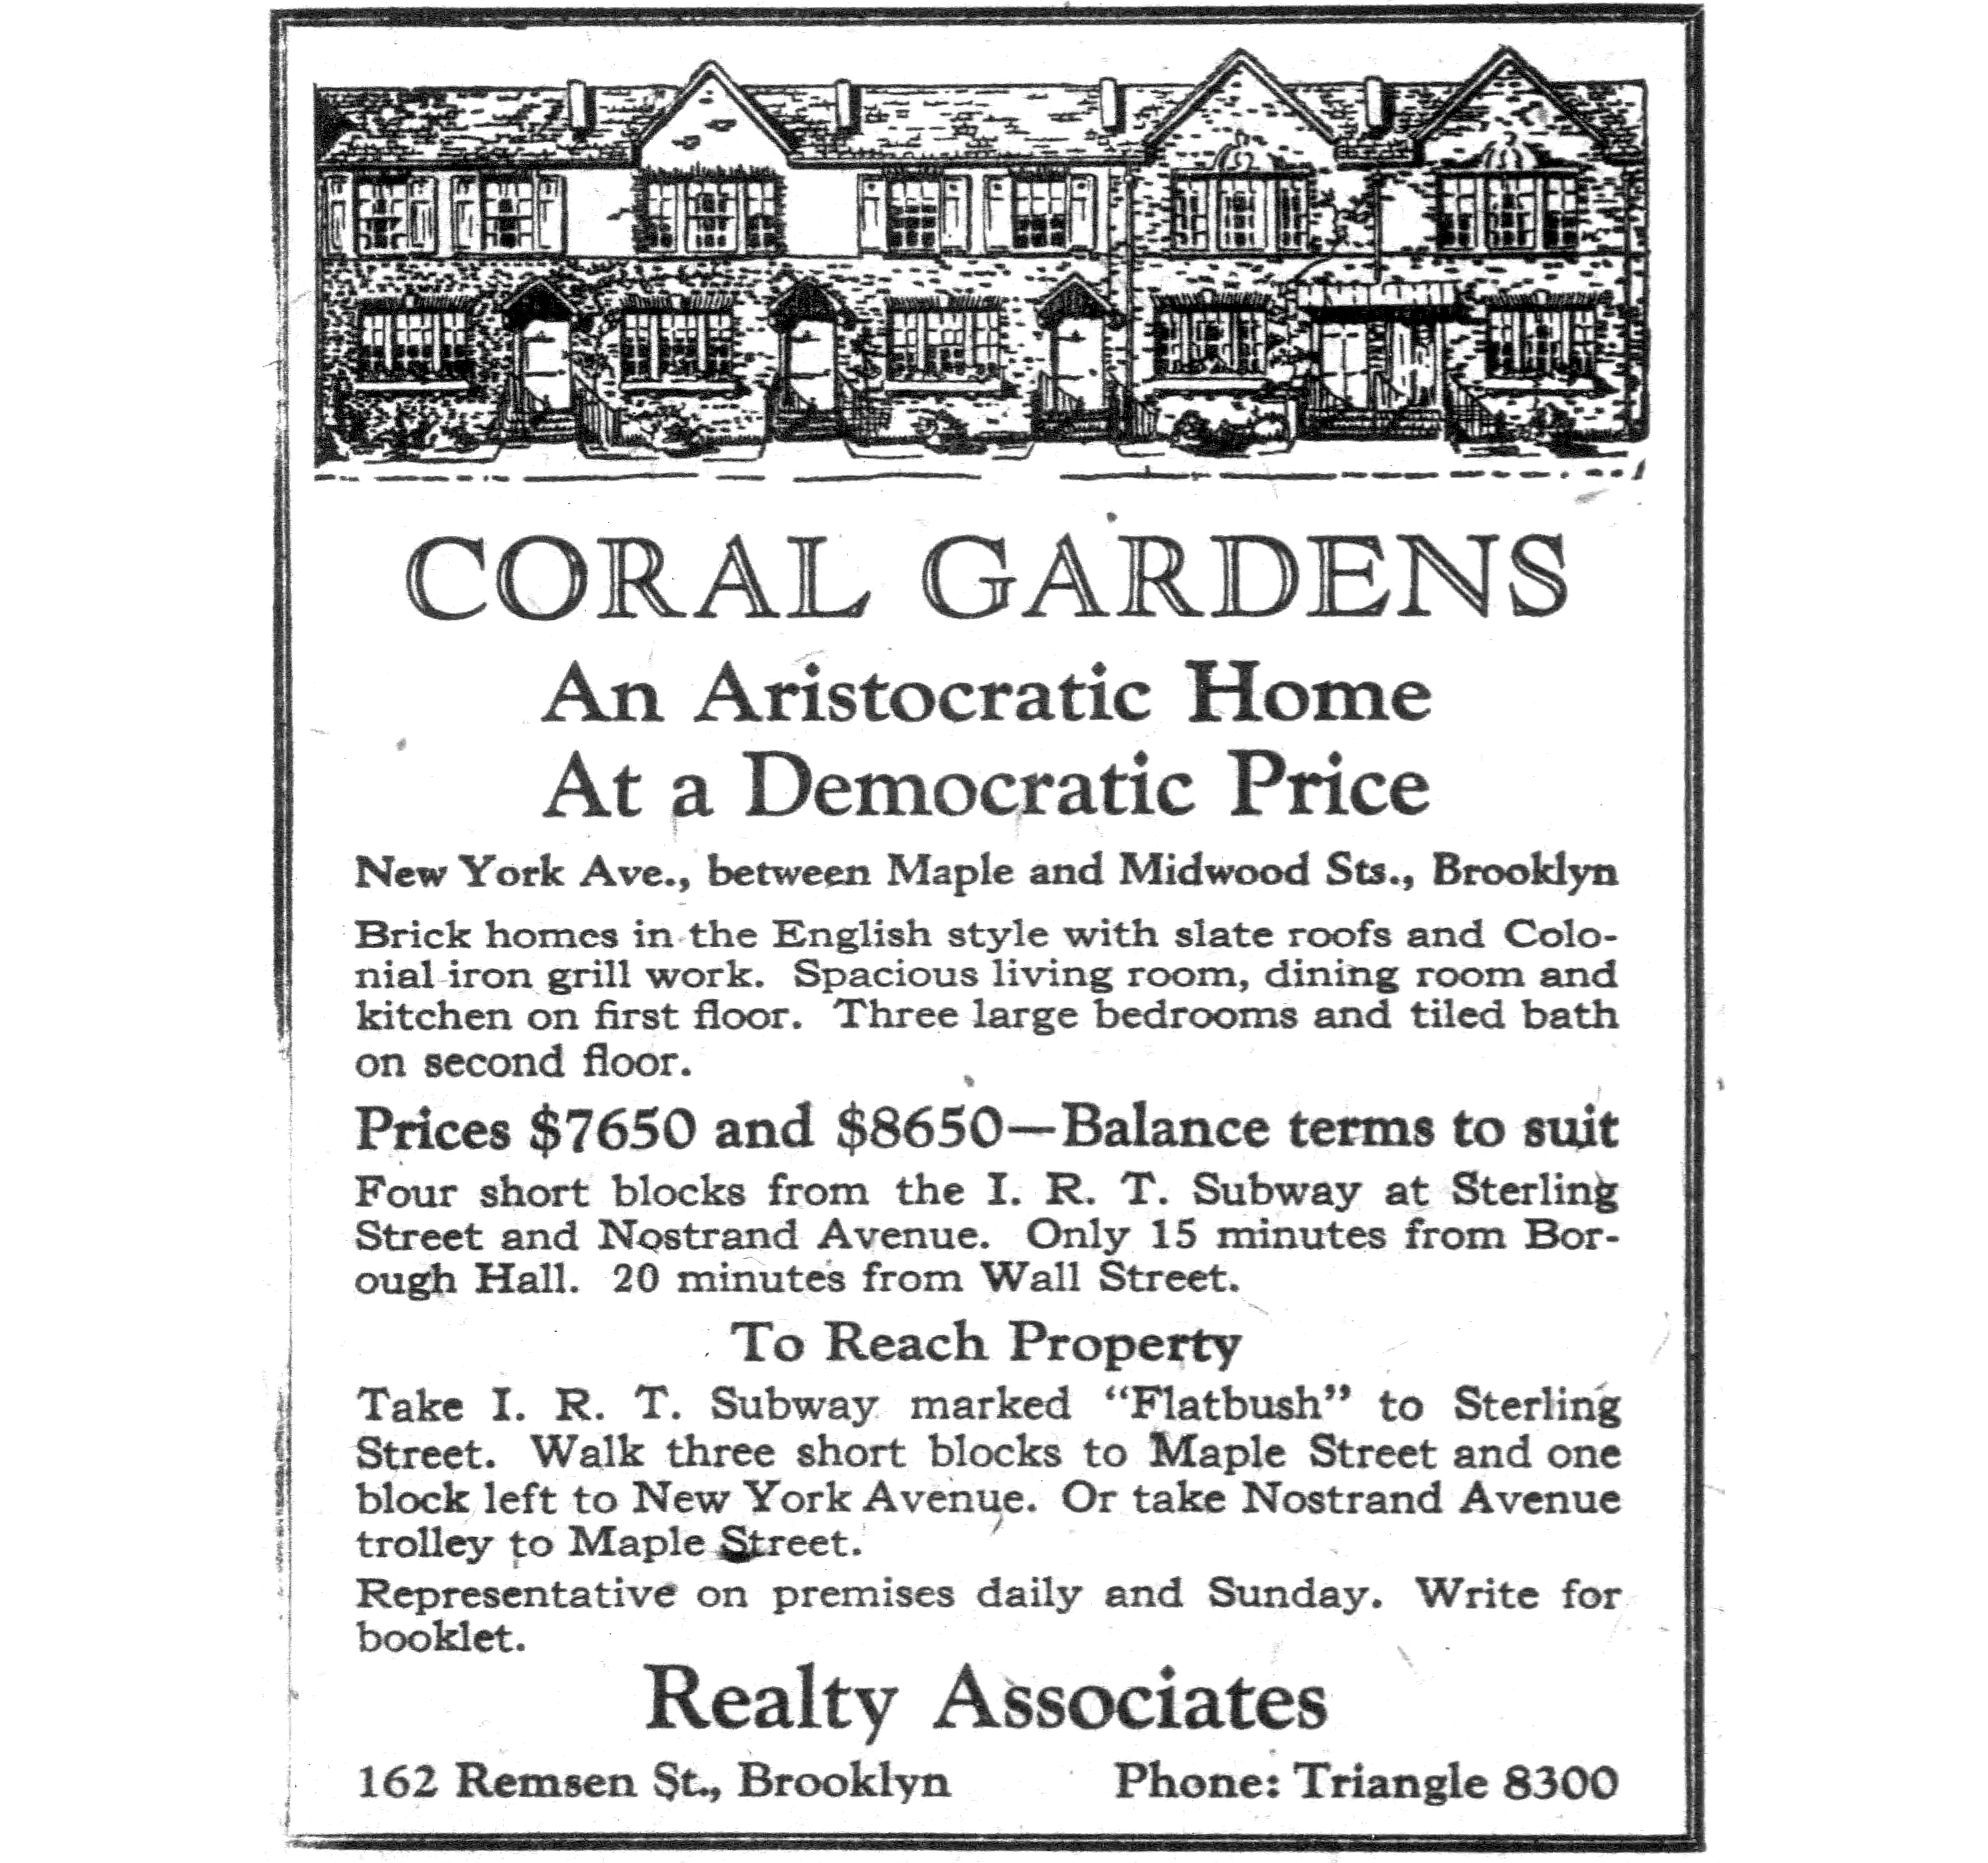 A 1924 ad for houses in Coral Gardens